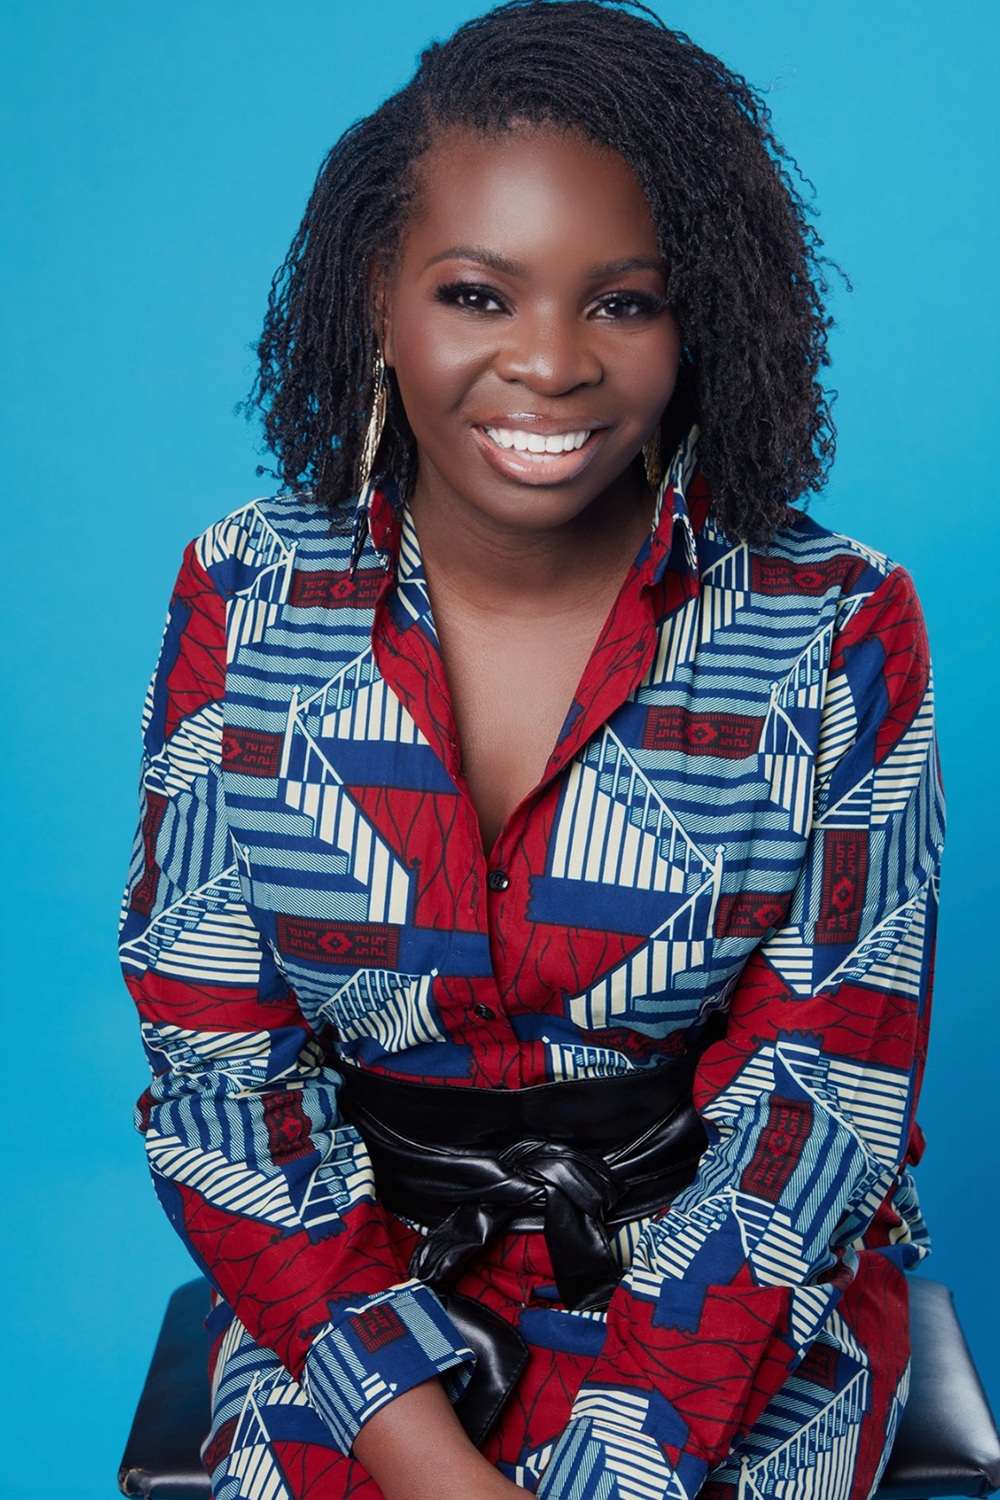 A young african woman smiling in front of a blue background.